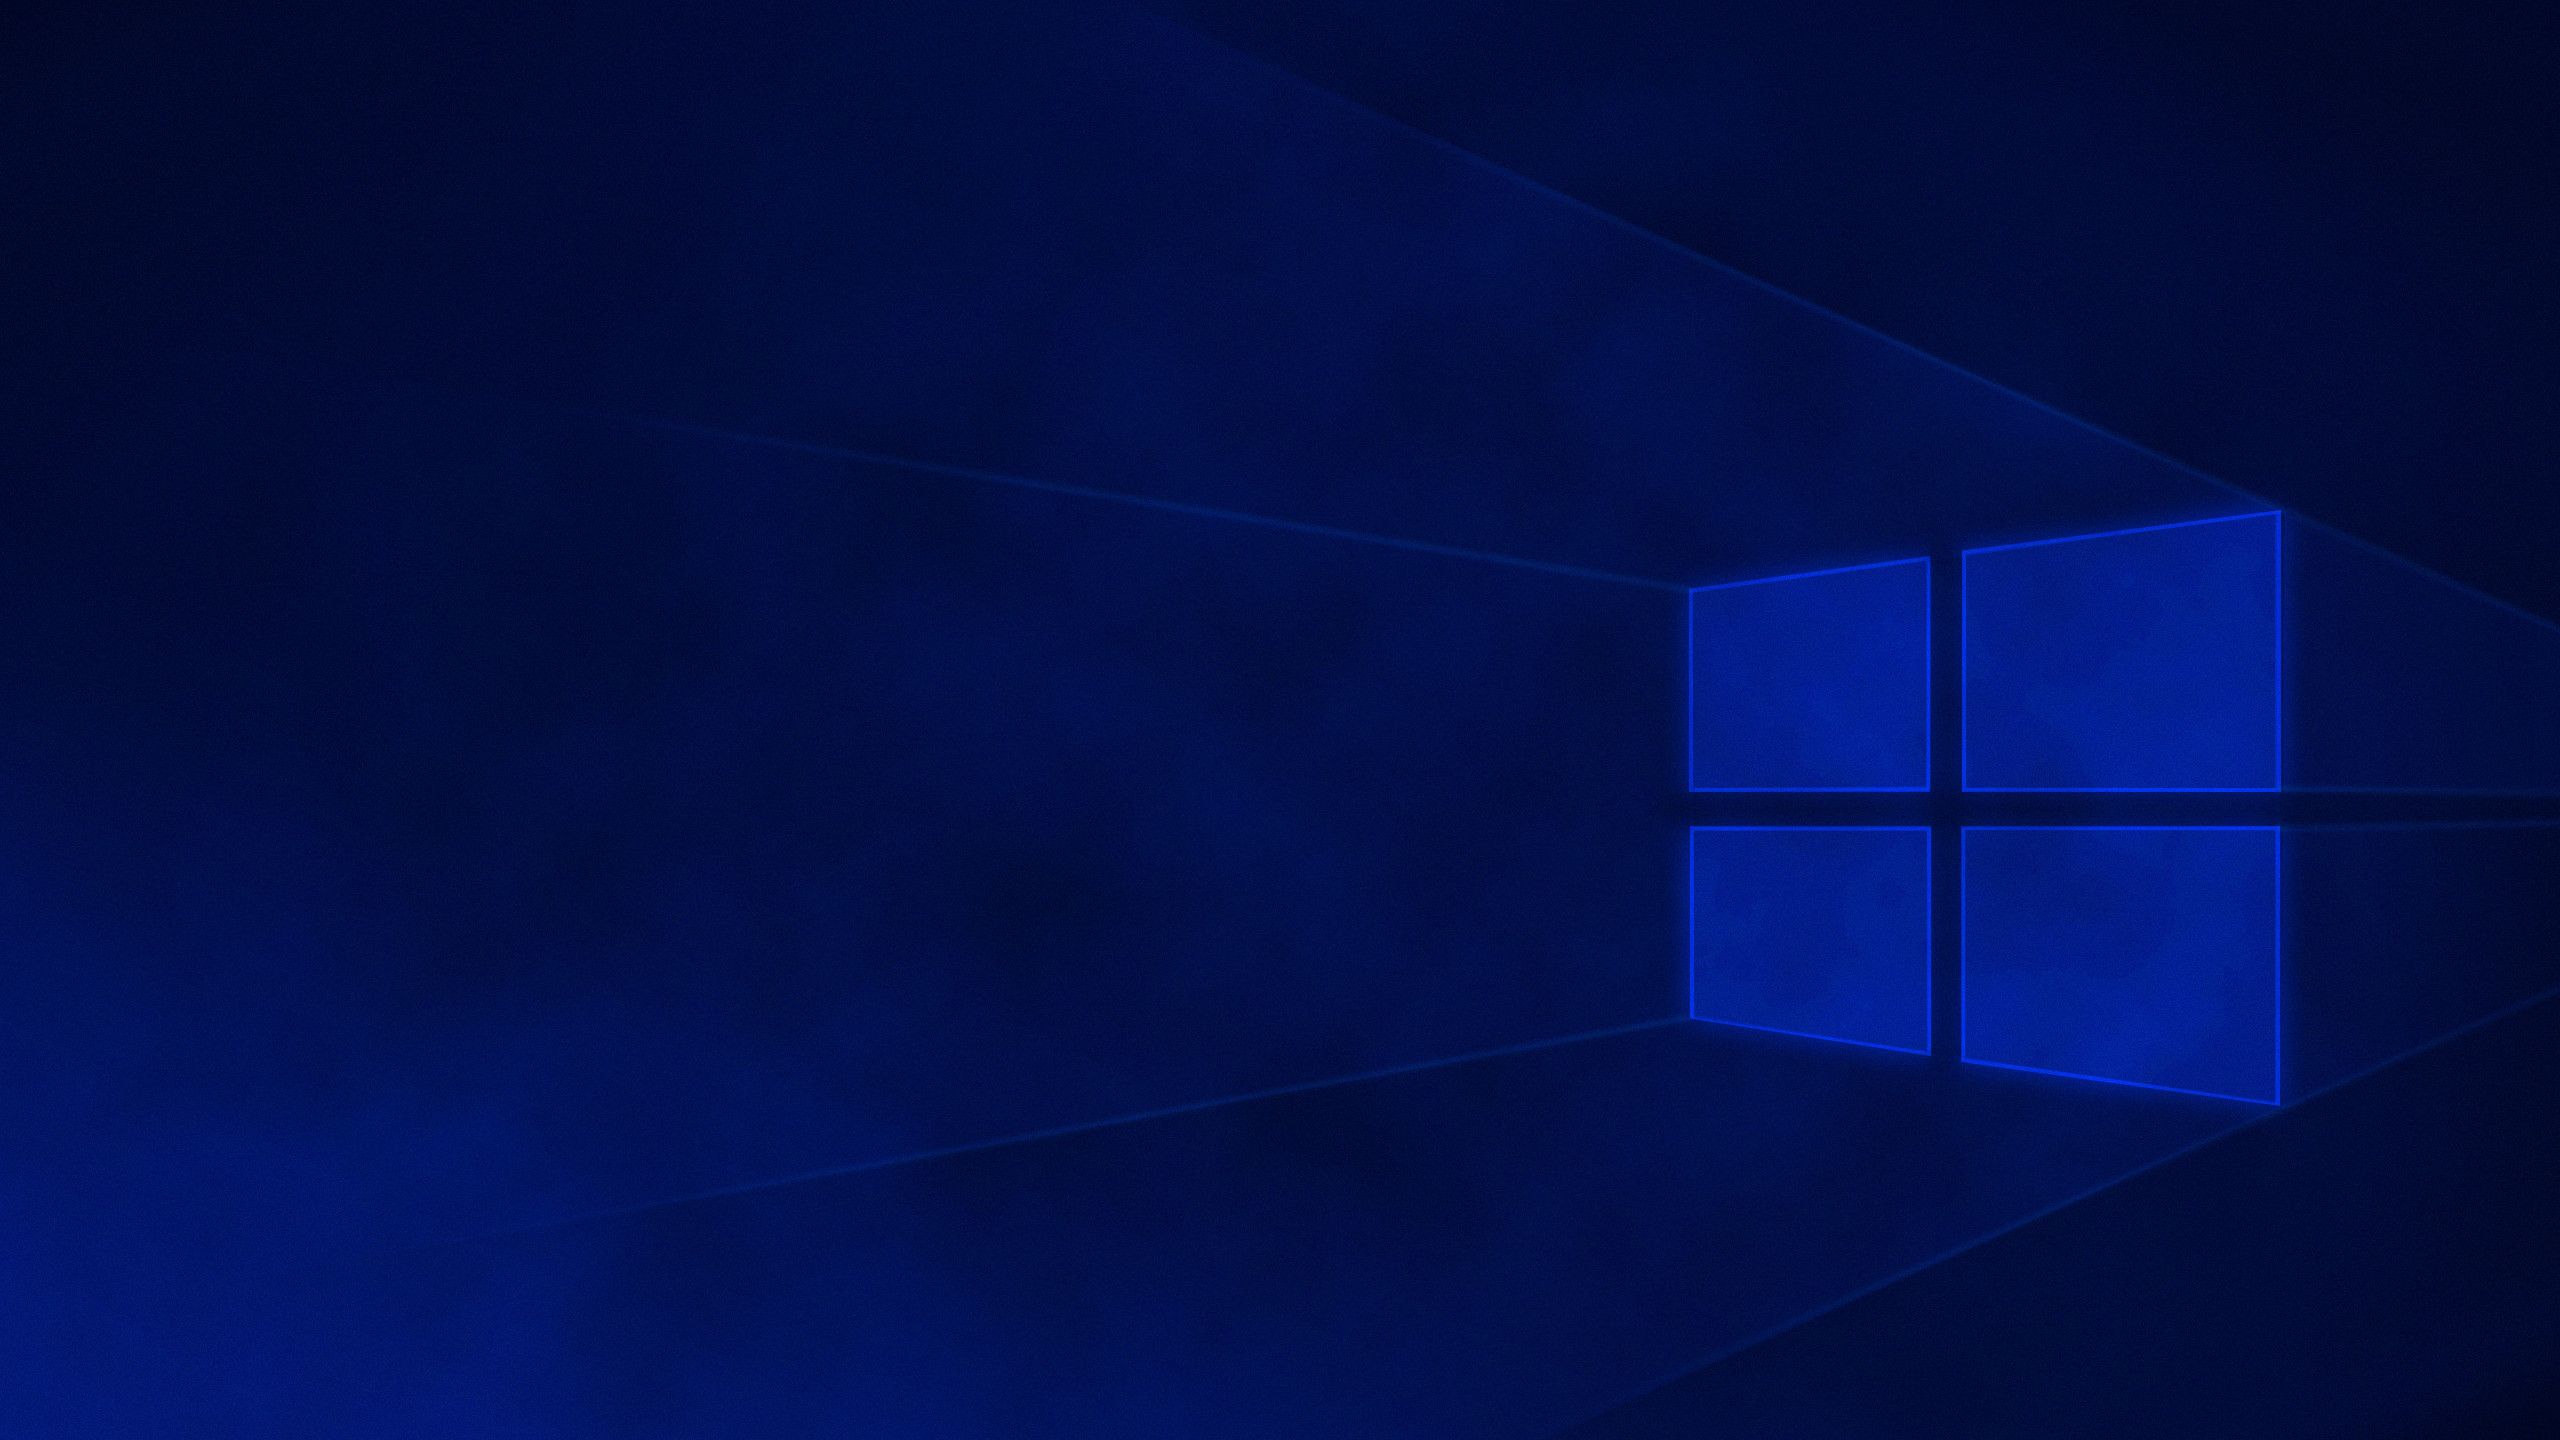 My version of Windows 10 Wallpapers